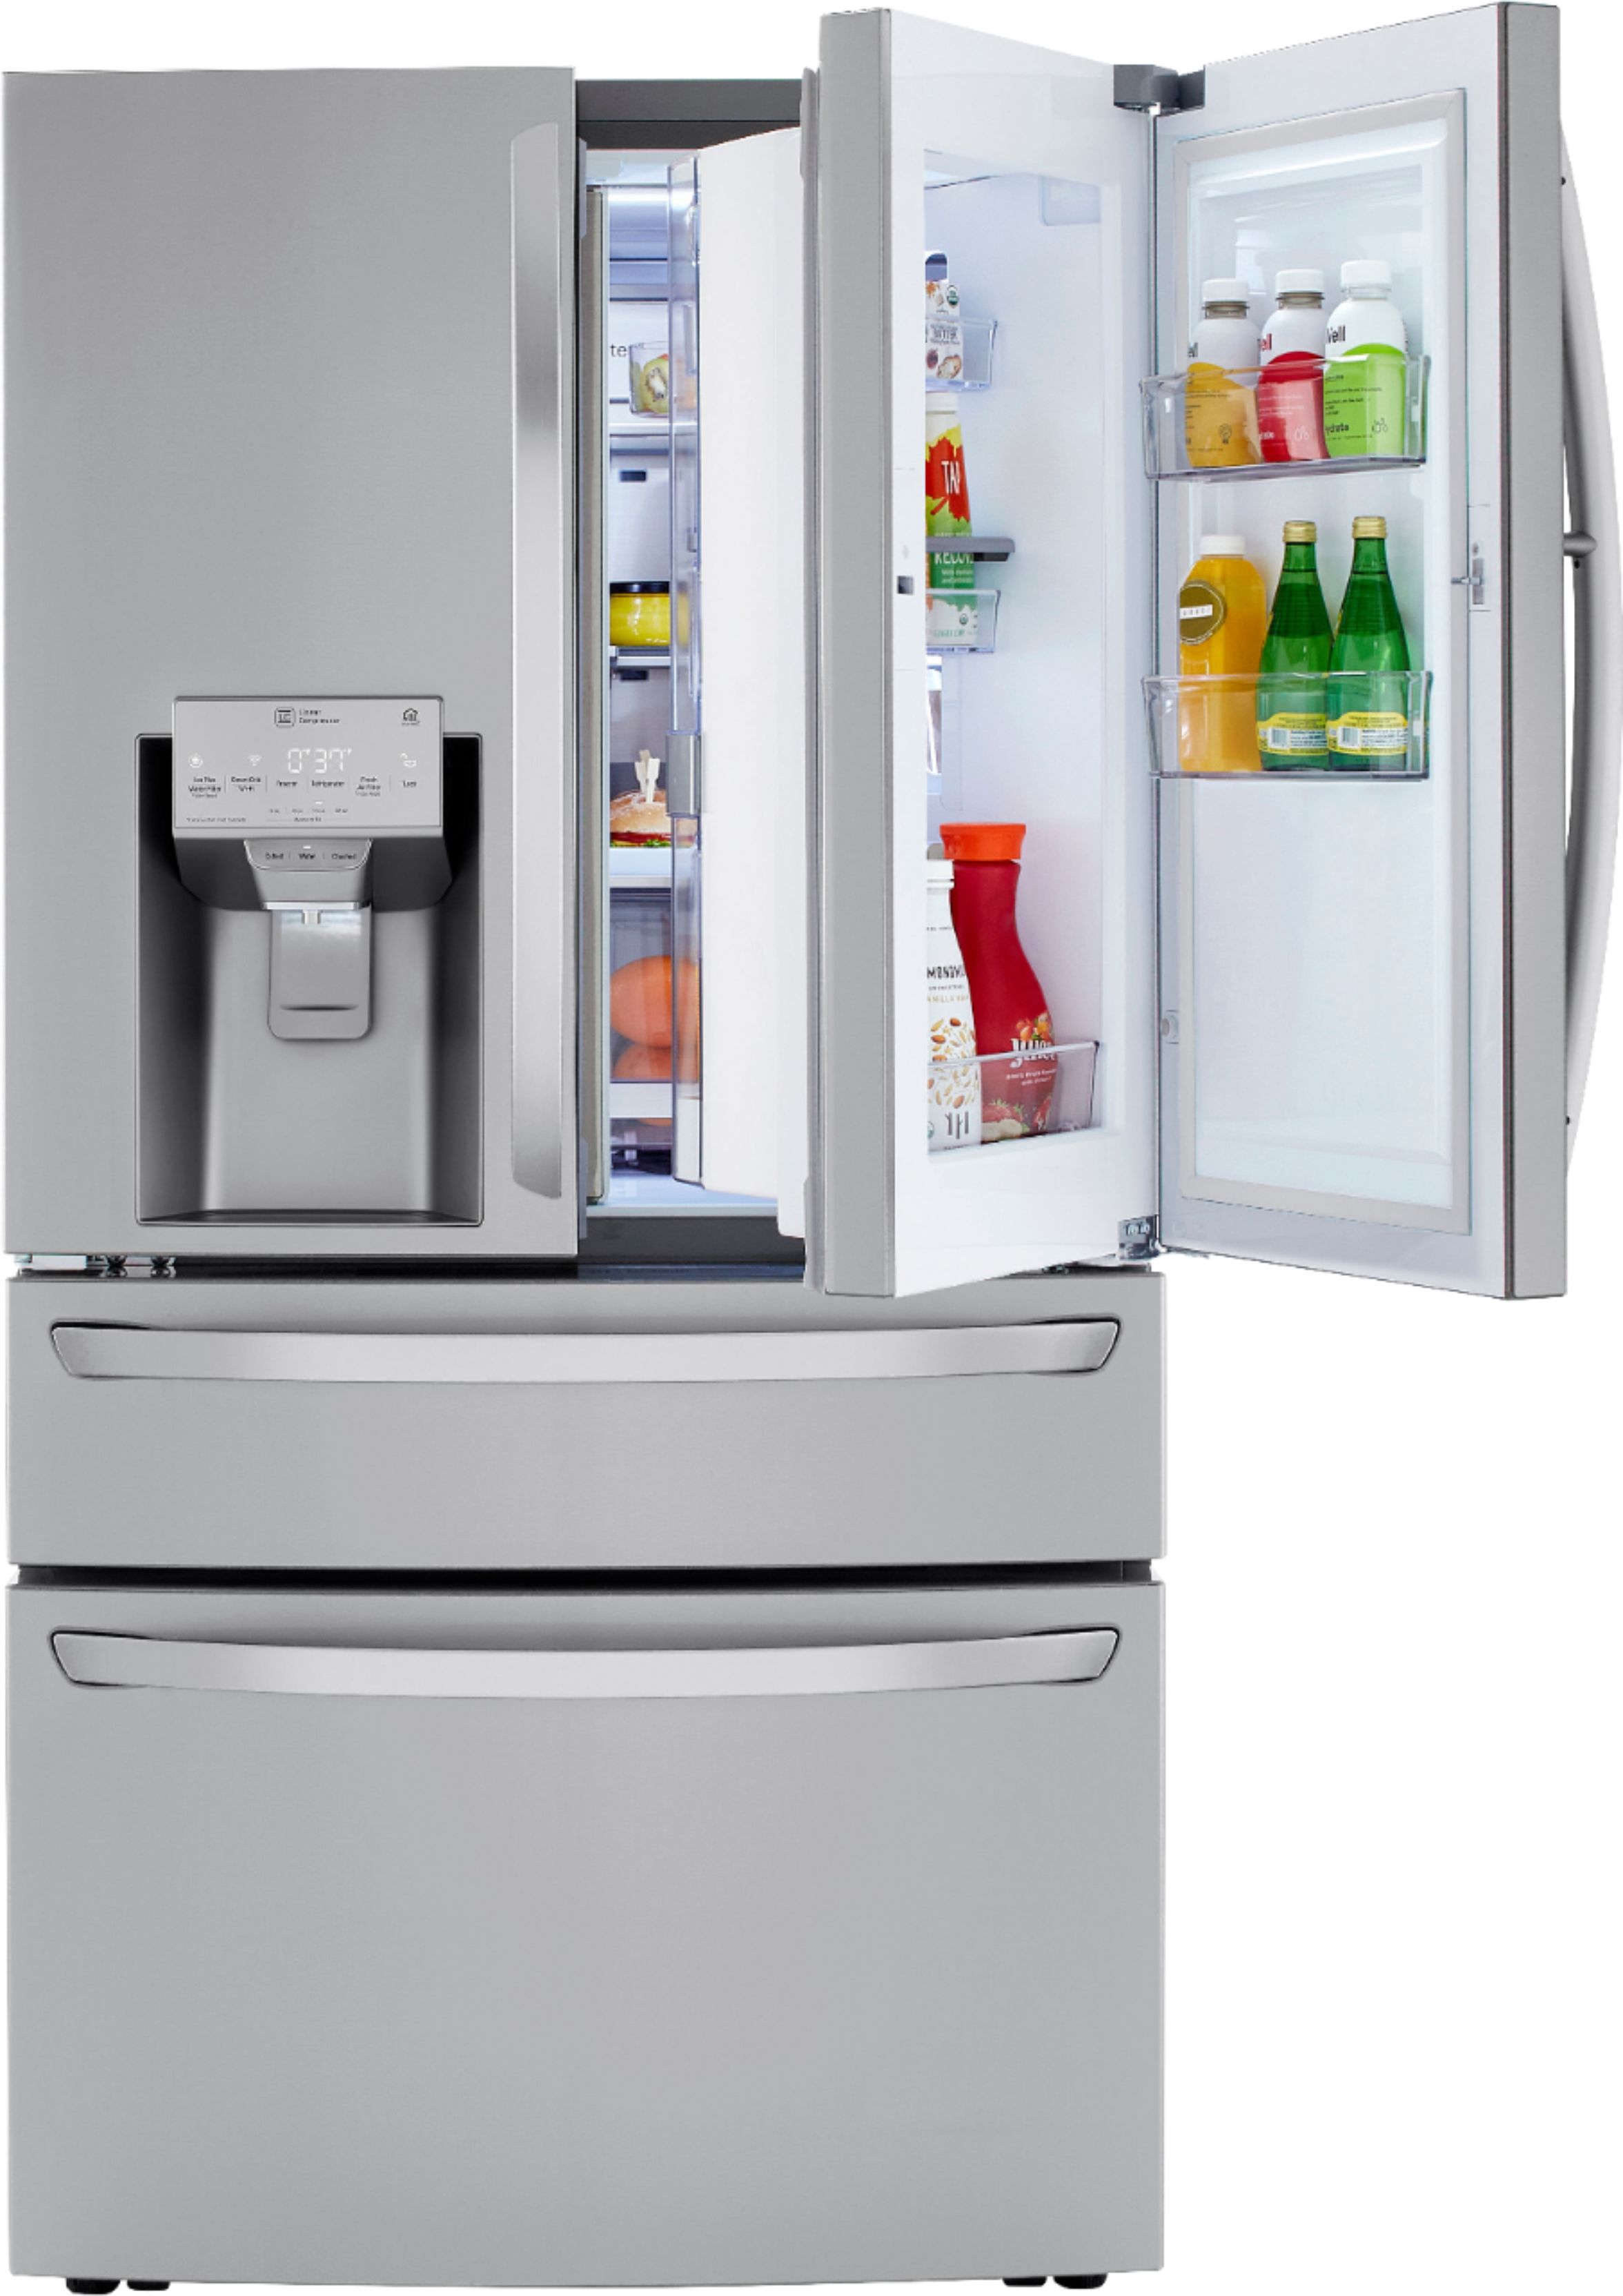 35++ Lg counter depth refrigerator issues ideas in 2021 